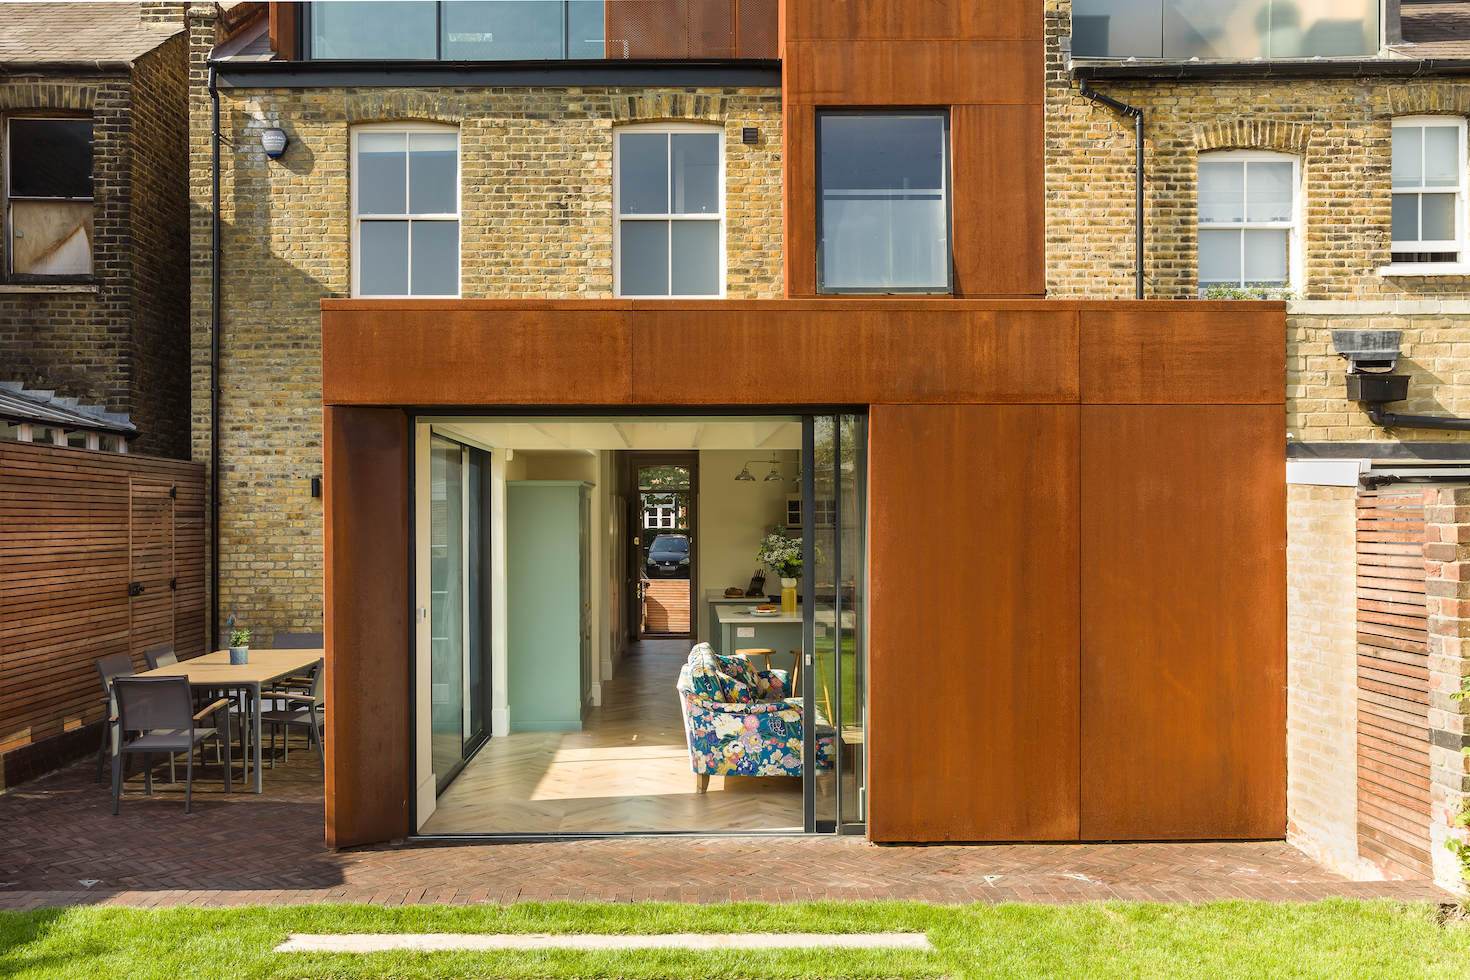 Key Points To Keep In Mind When Considering A House Extension